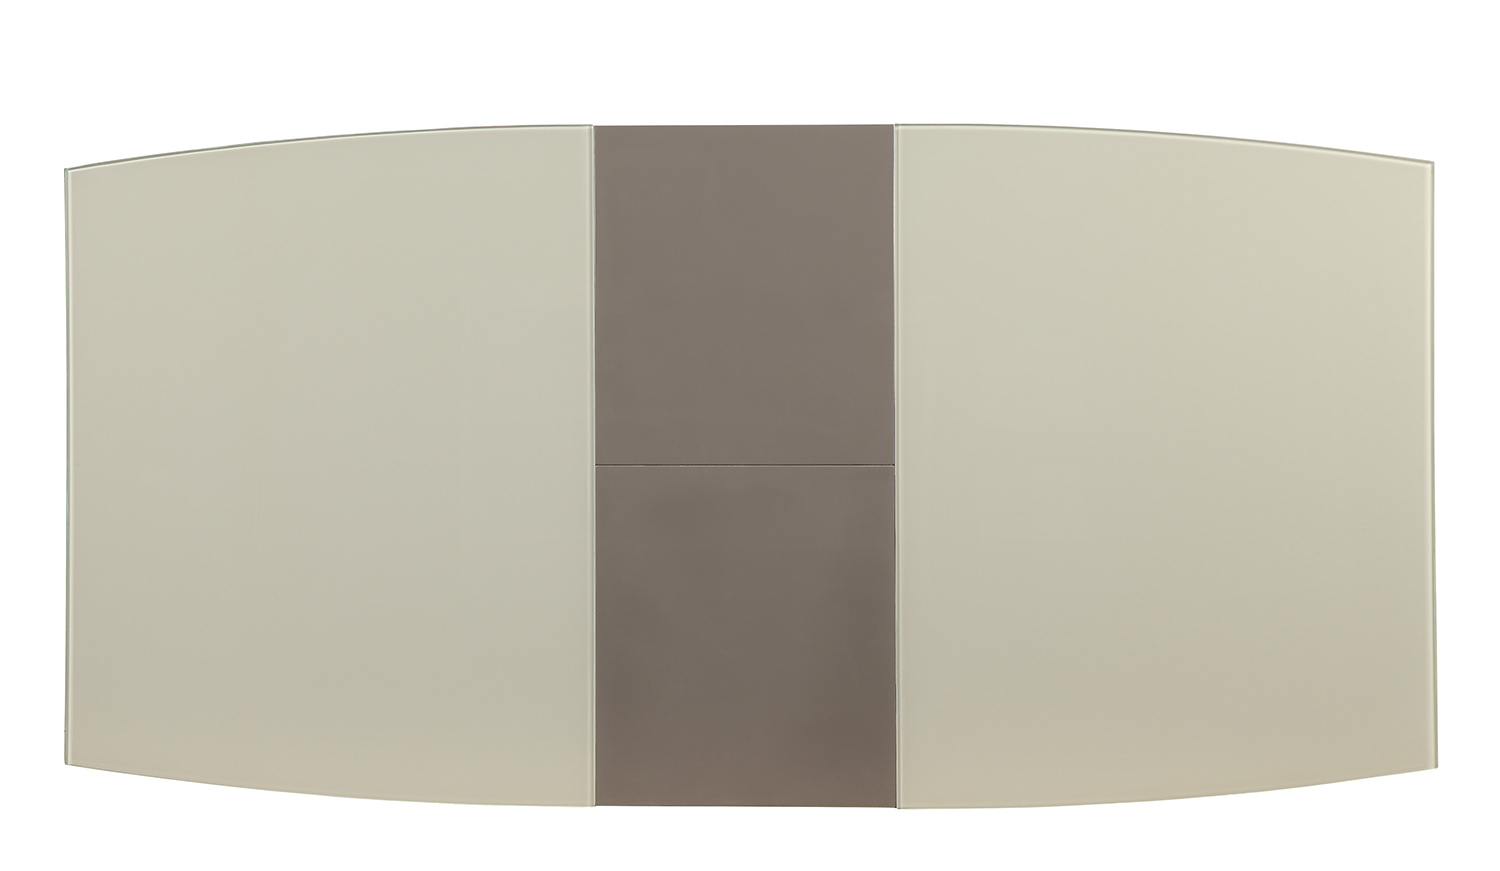 Homelegance Glissand Dining Table - Glossy - Grey-Taupe Bi-Cast Vinyl